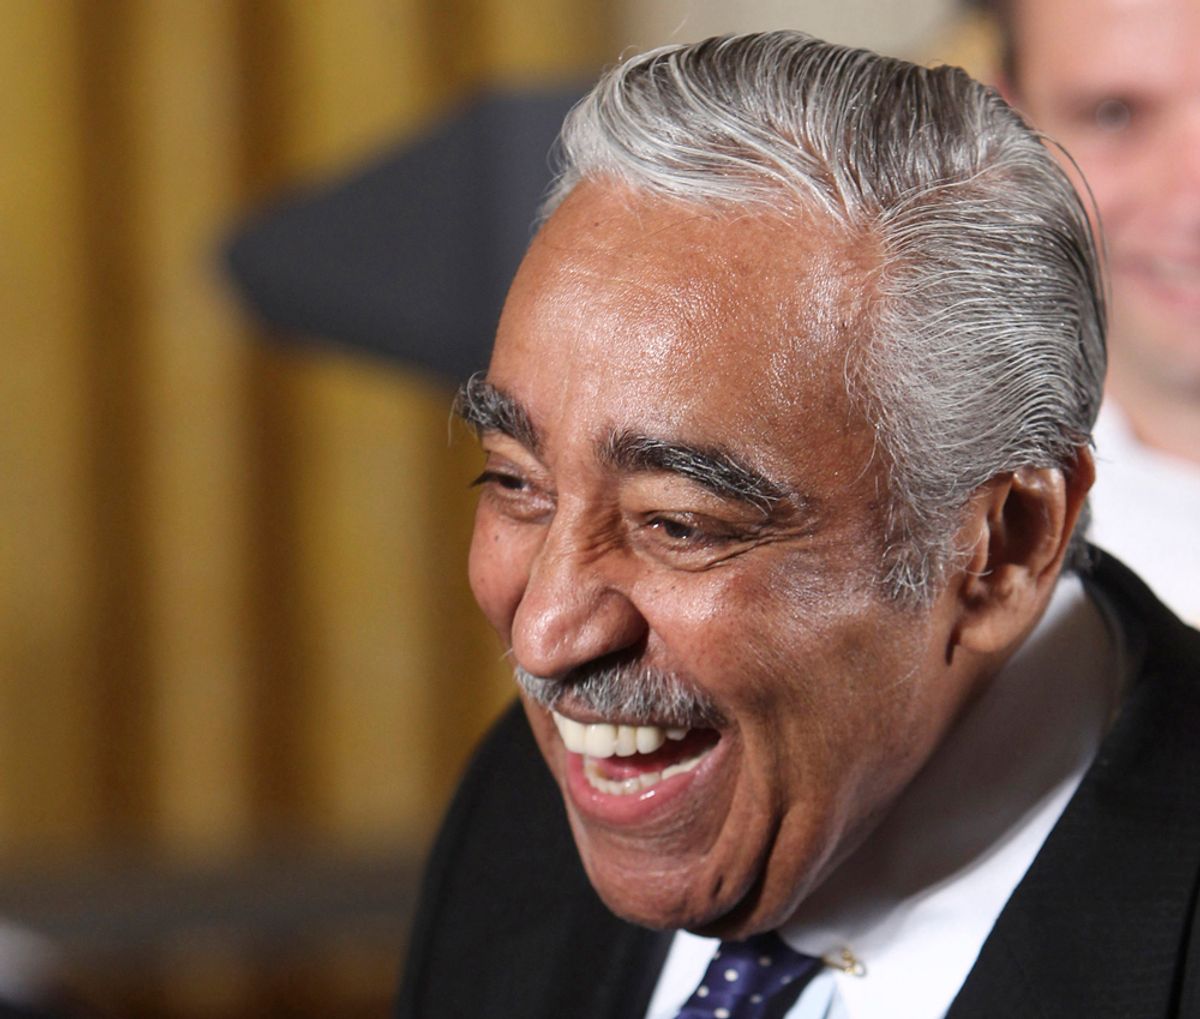 U.S. Rep. Charles Rangel smiles before U.S. President Barack Obama hosts the 2009 World Series Champions New York Yankees in the East Room of the White House in Washington, April 26, 2010.    REUTERS/Larry Downing  (UNITED STATES - Tags: POLITICS) (Â© Larry Downing / Reuters)